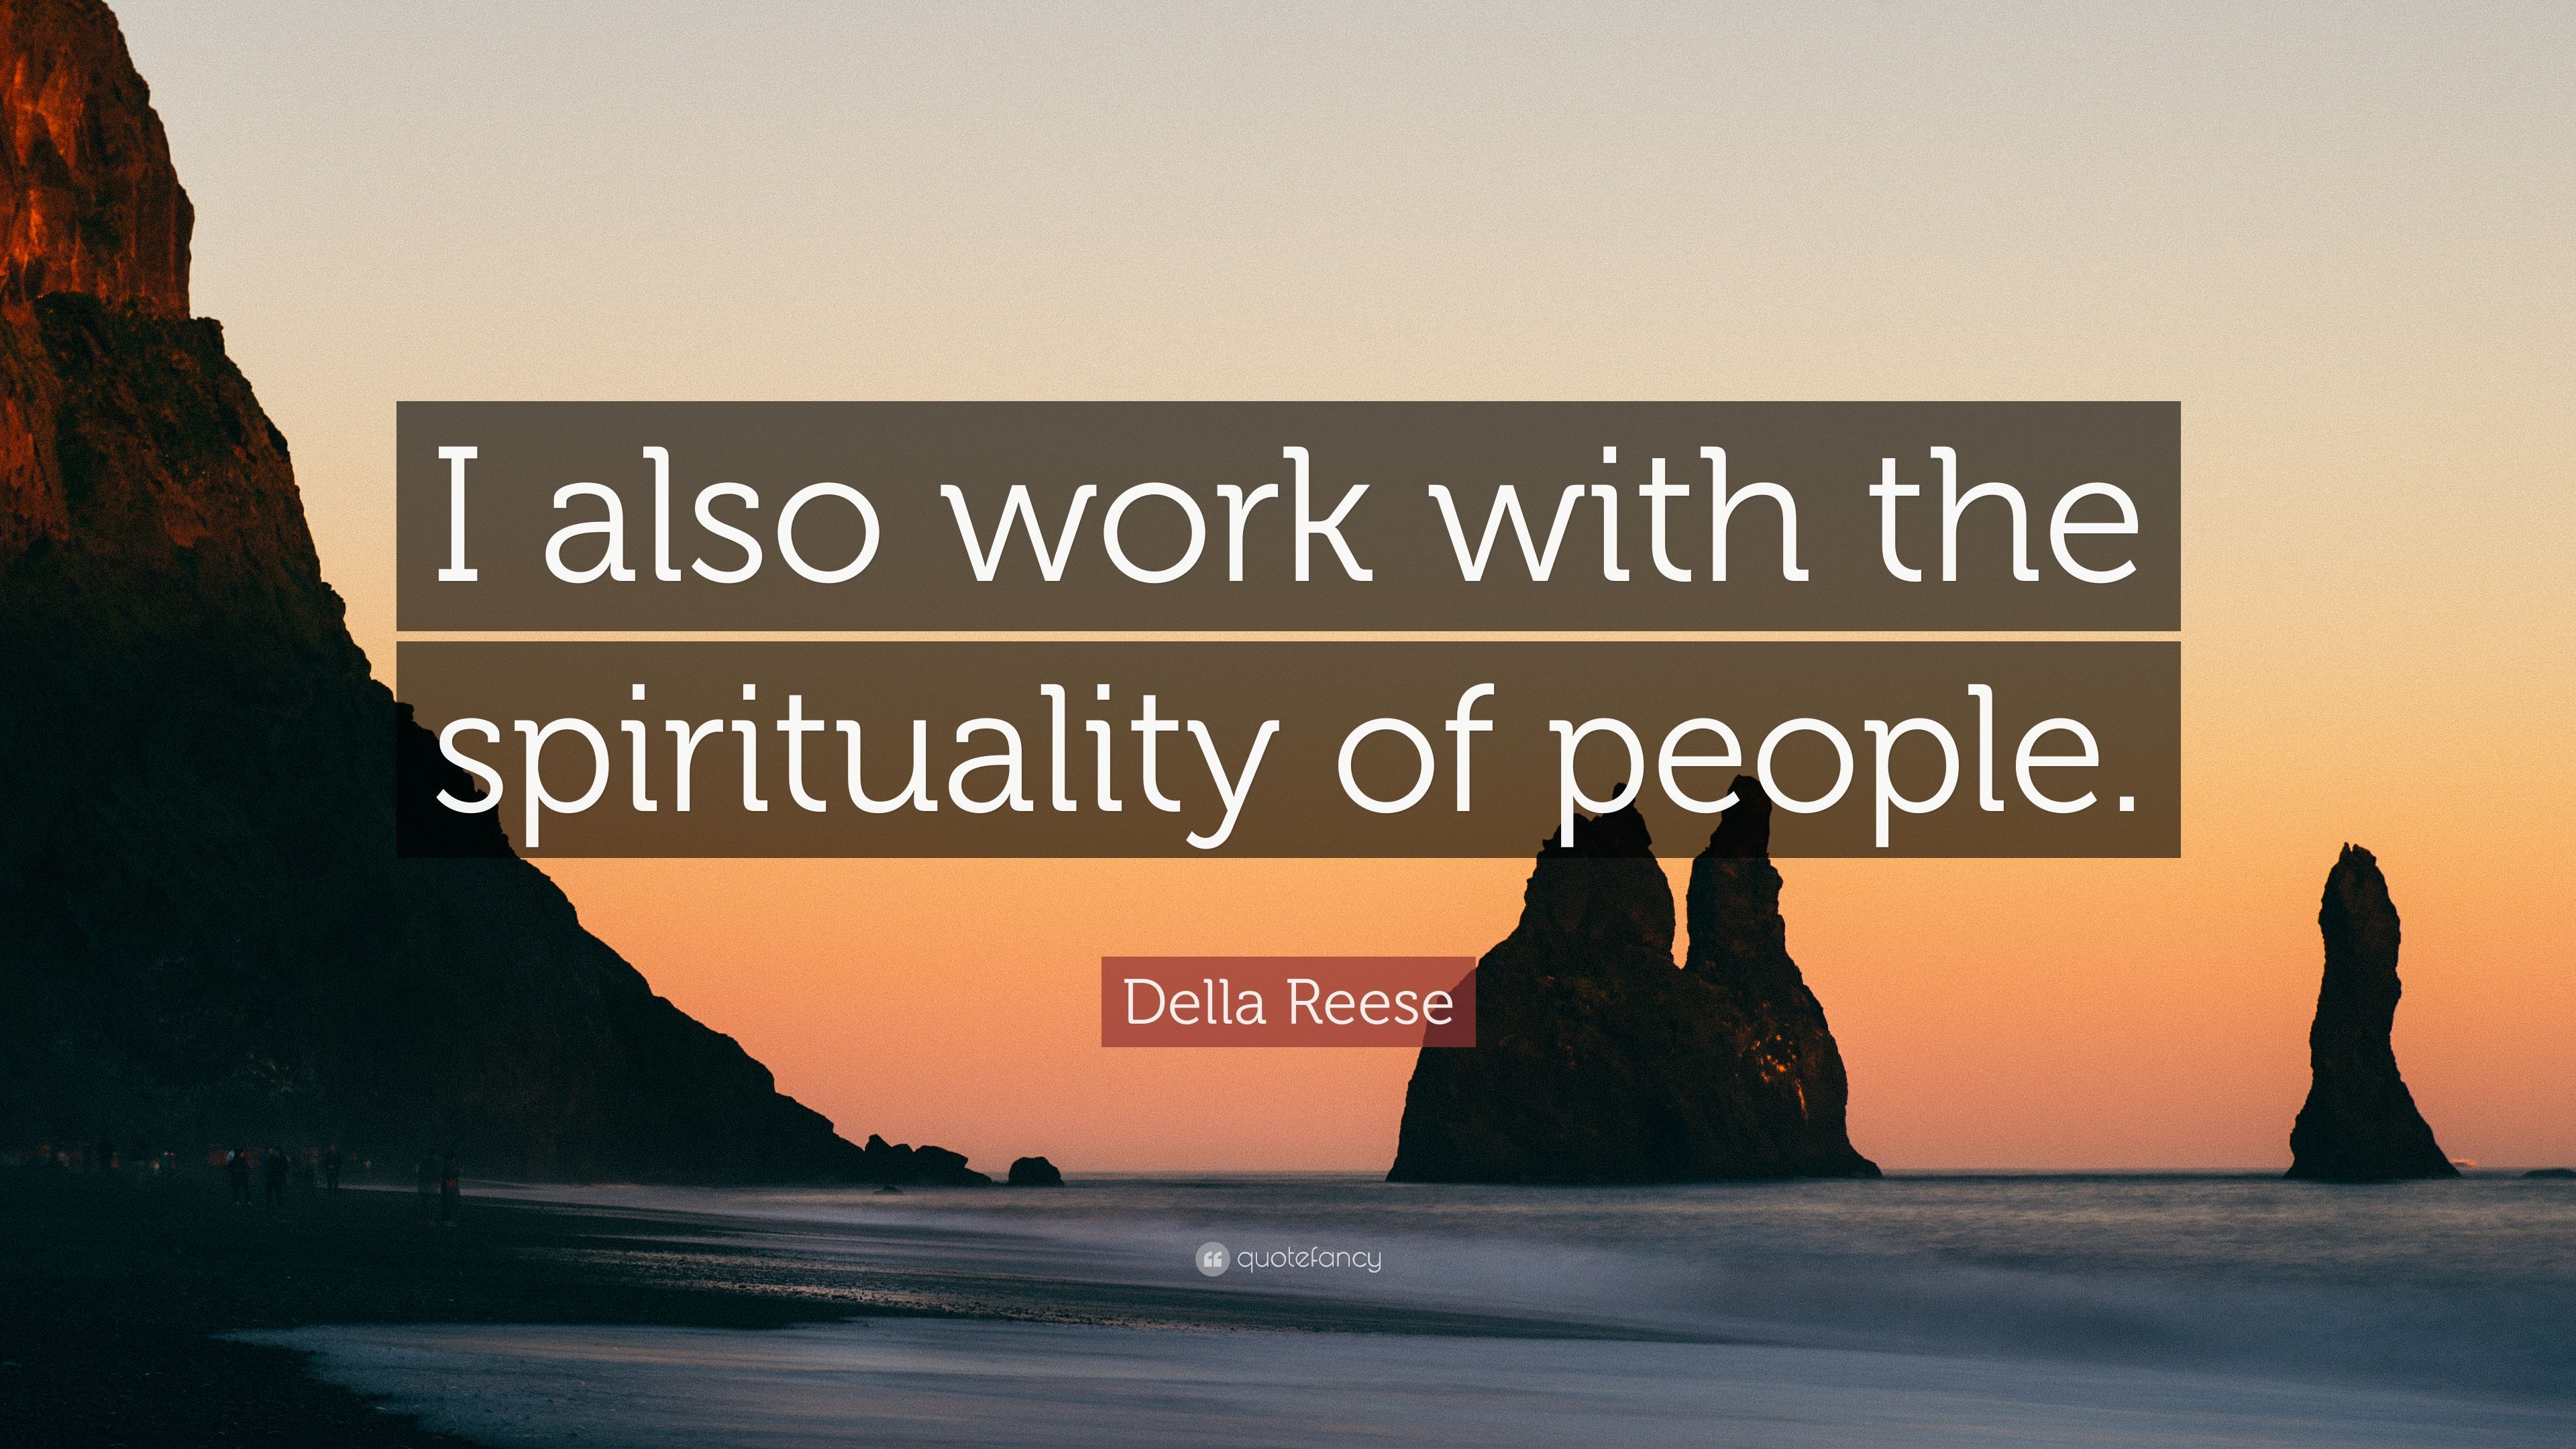 Della Reese Quote: “I also work with the spirituality of people